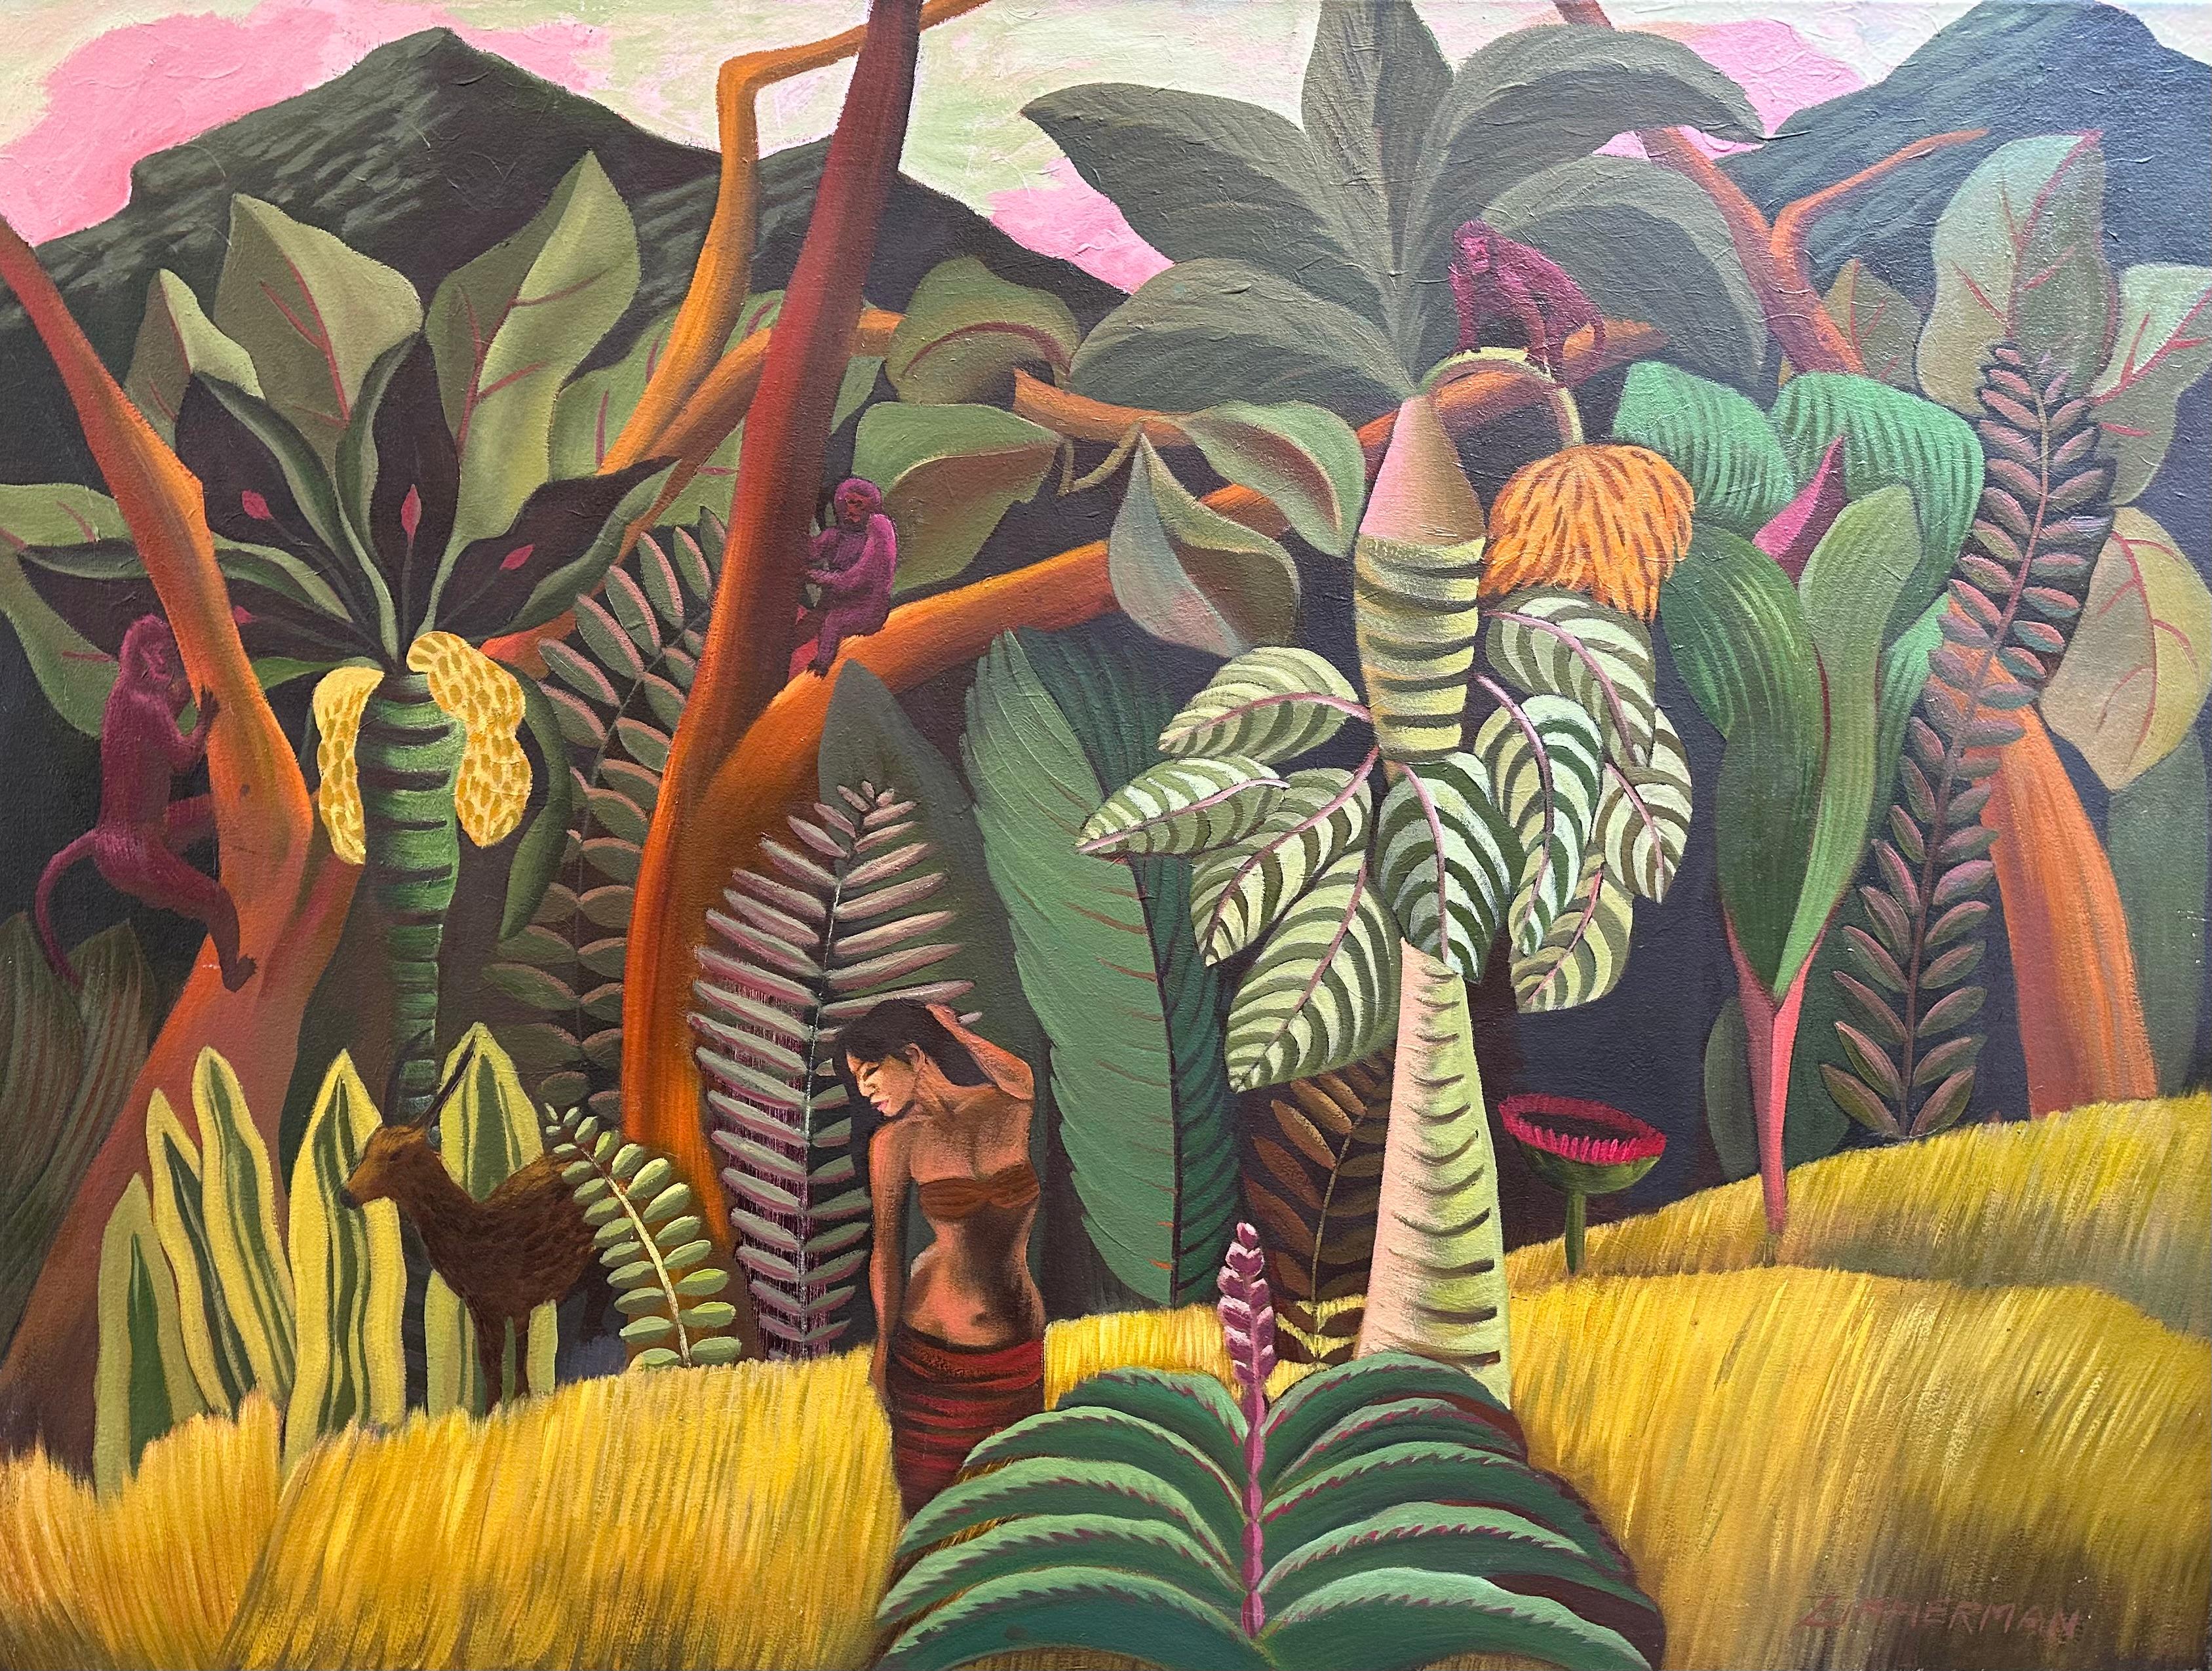 Jungle Rhythm By Marc Zimmerman


Marc Zimmerman creates playful paintings, whether deep mysterious jungle or delightfully whimsical florals. His color palette explores various harmonies yet always surprises with new color excitement. Years of